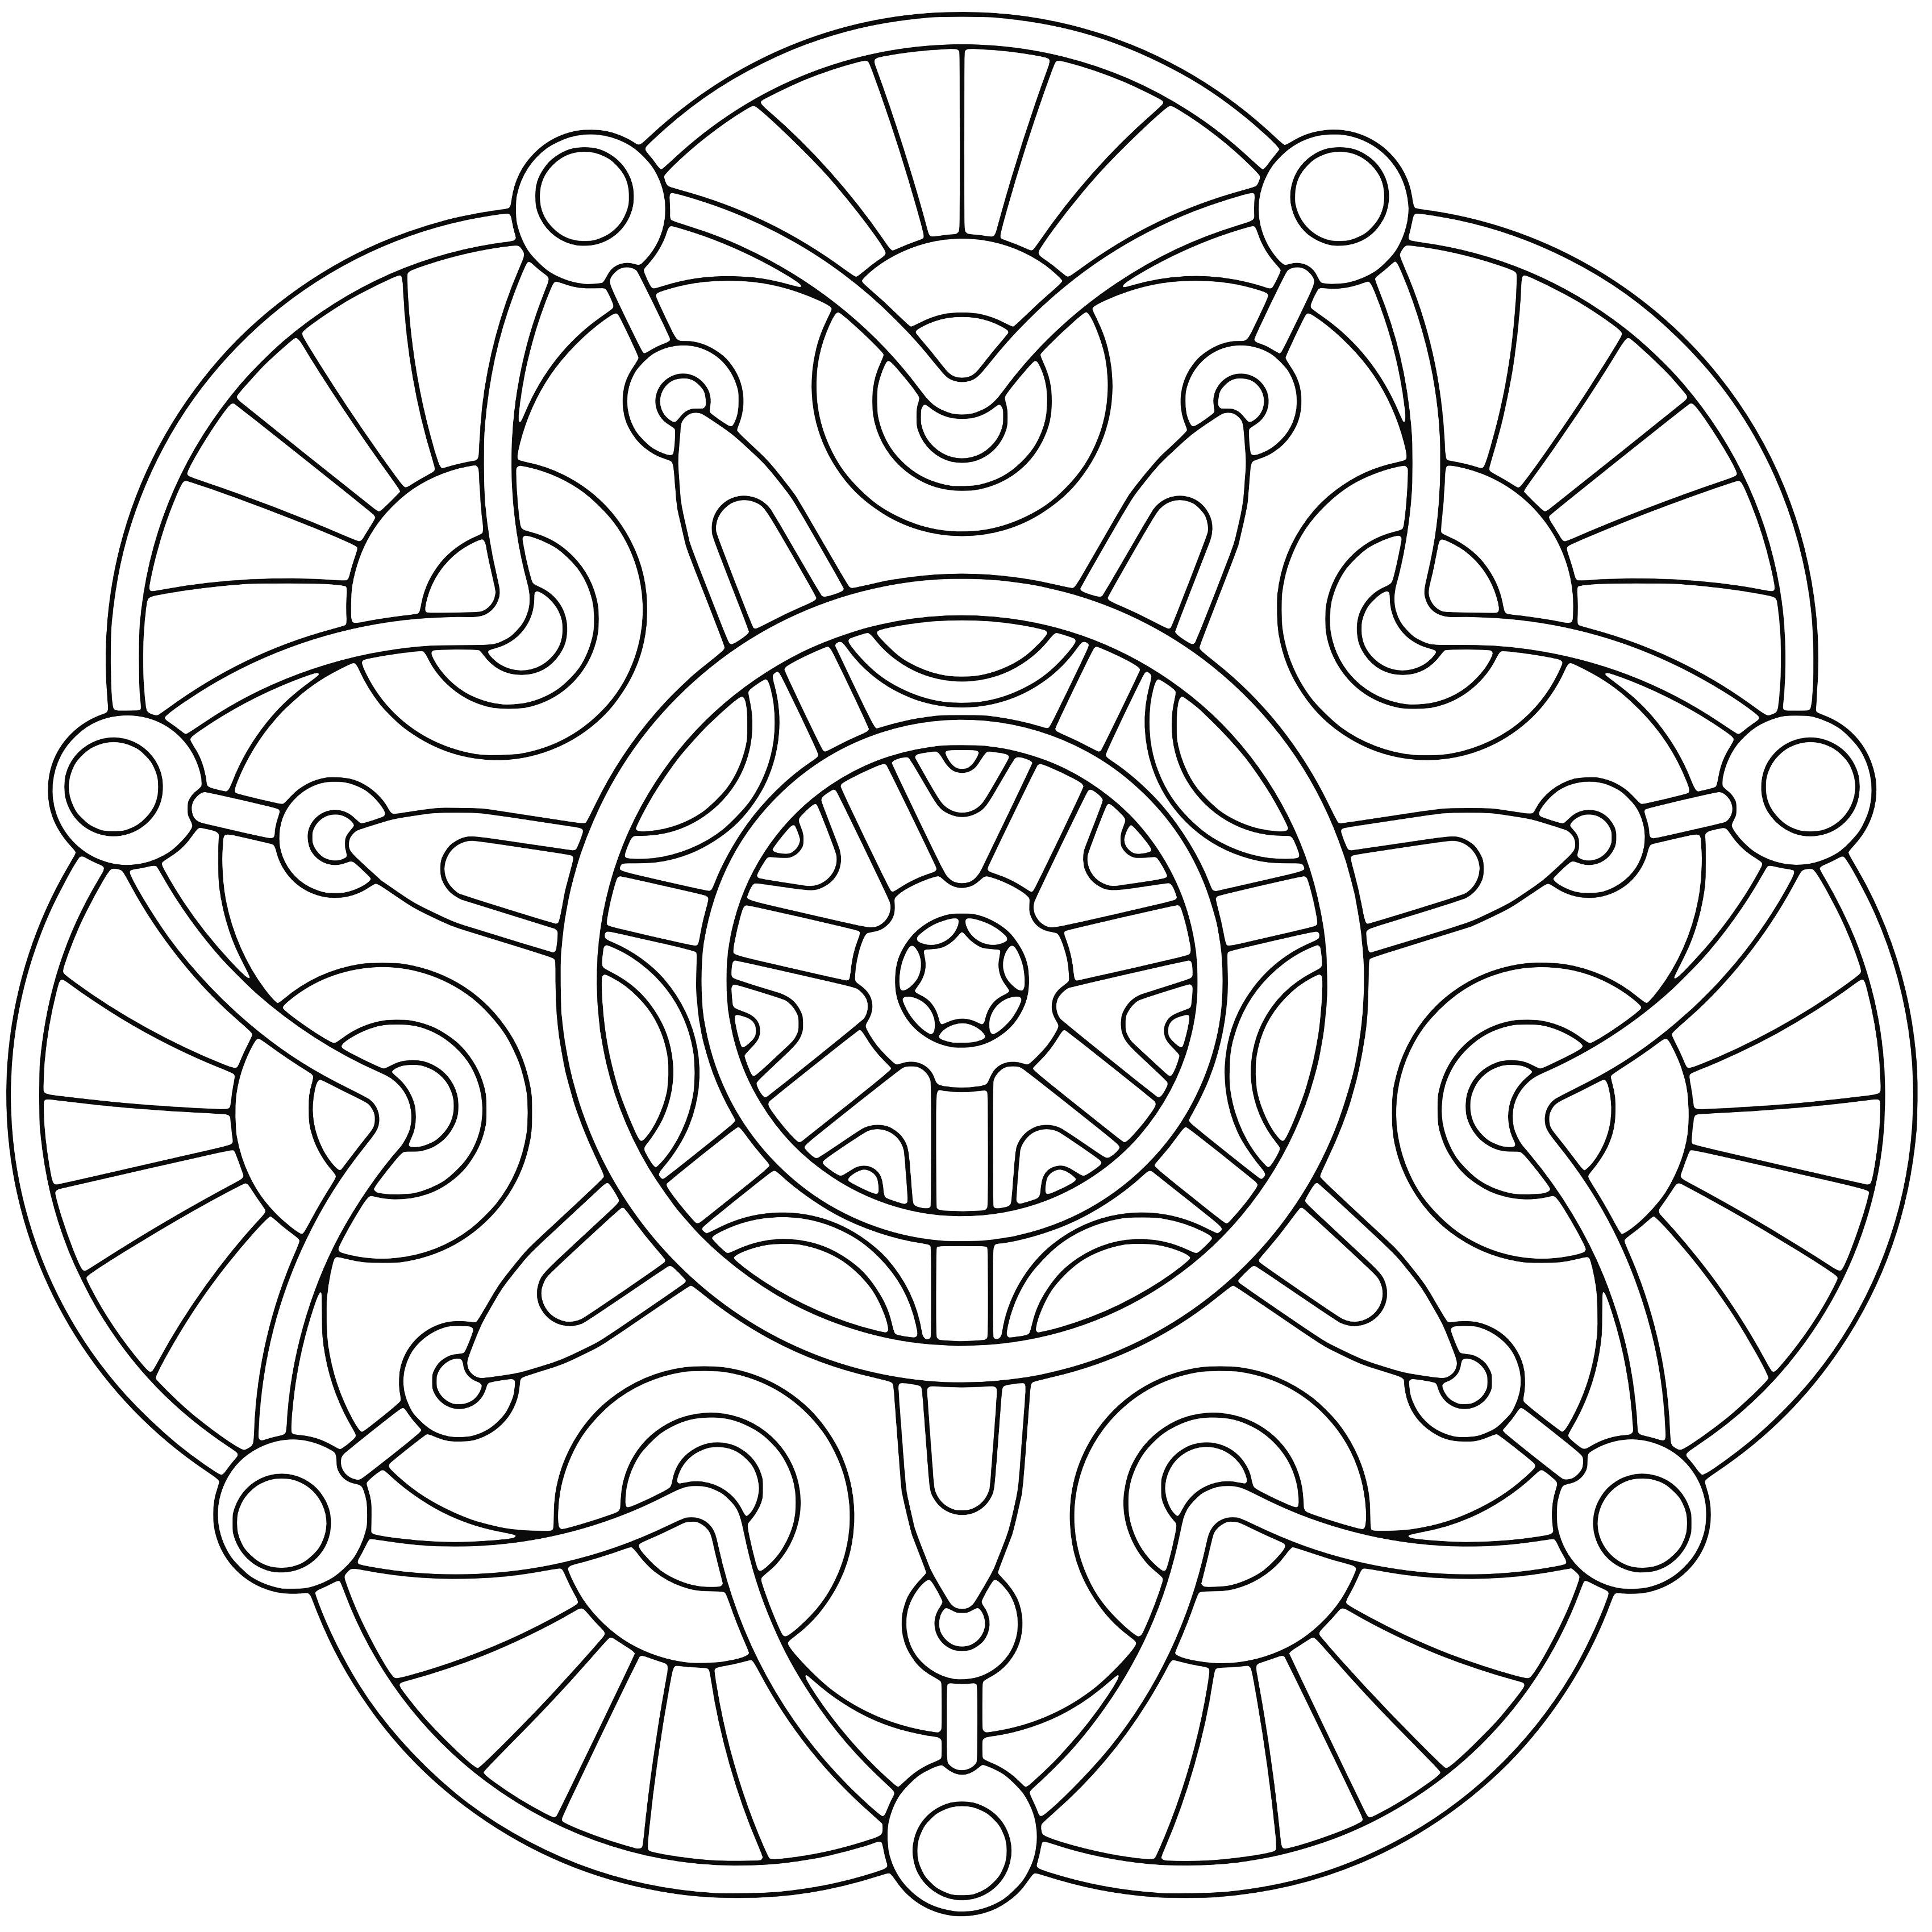 color-pages-free-download-archives-page-9-of-49-coloring-pages